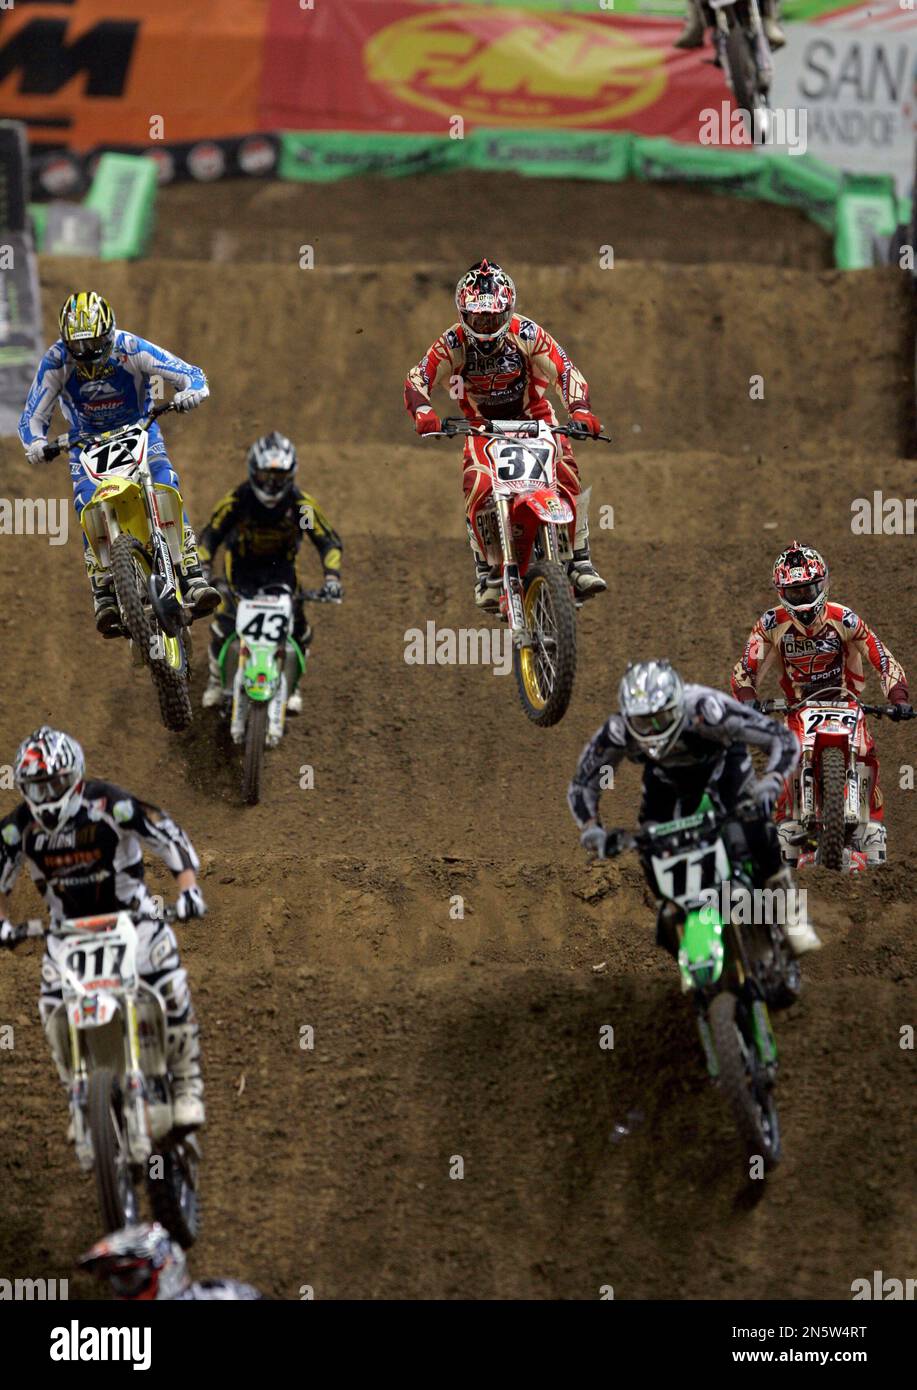 In this April 19, 2008, photo, riders make their way around the track during an AMA Supercross motorcycle race in St